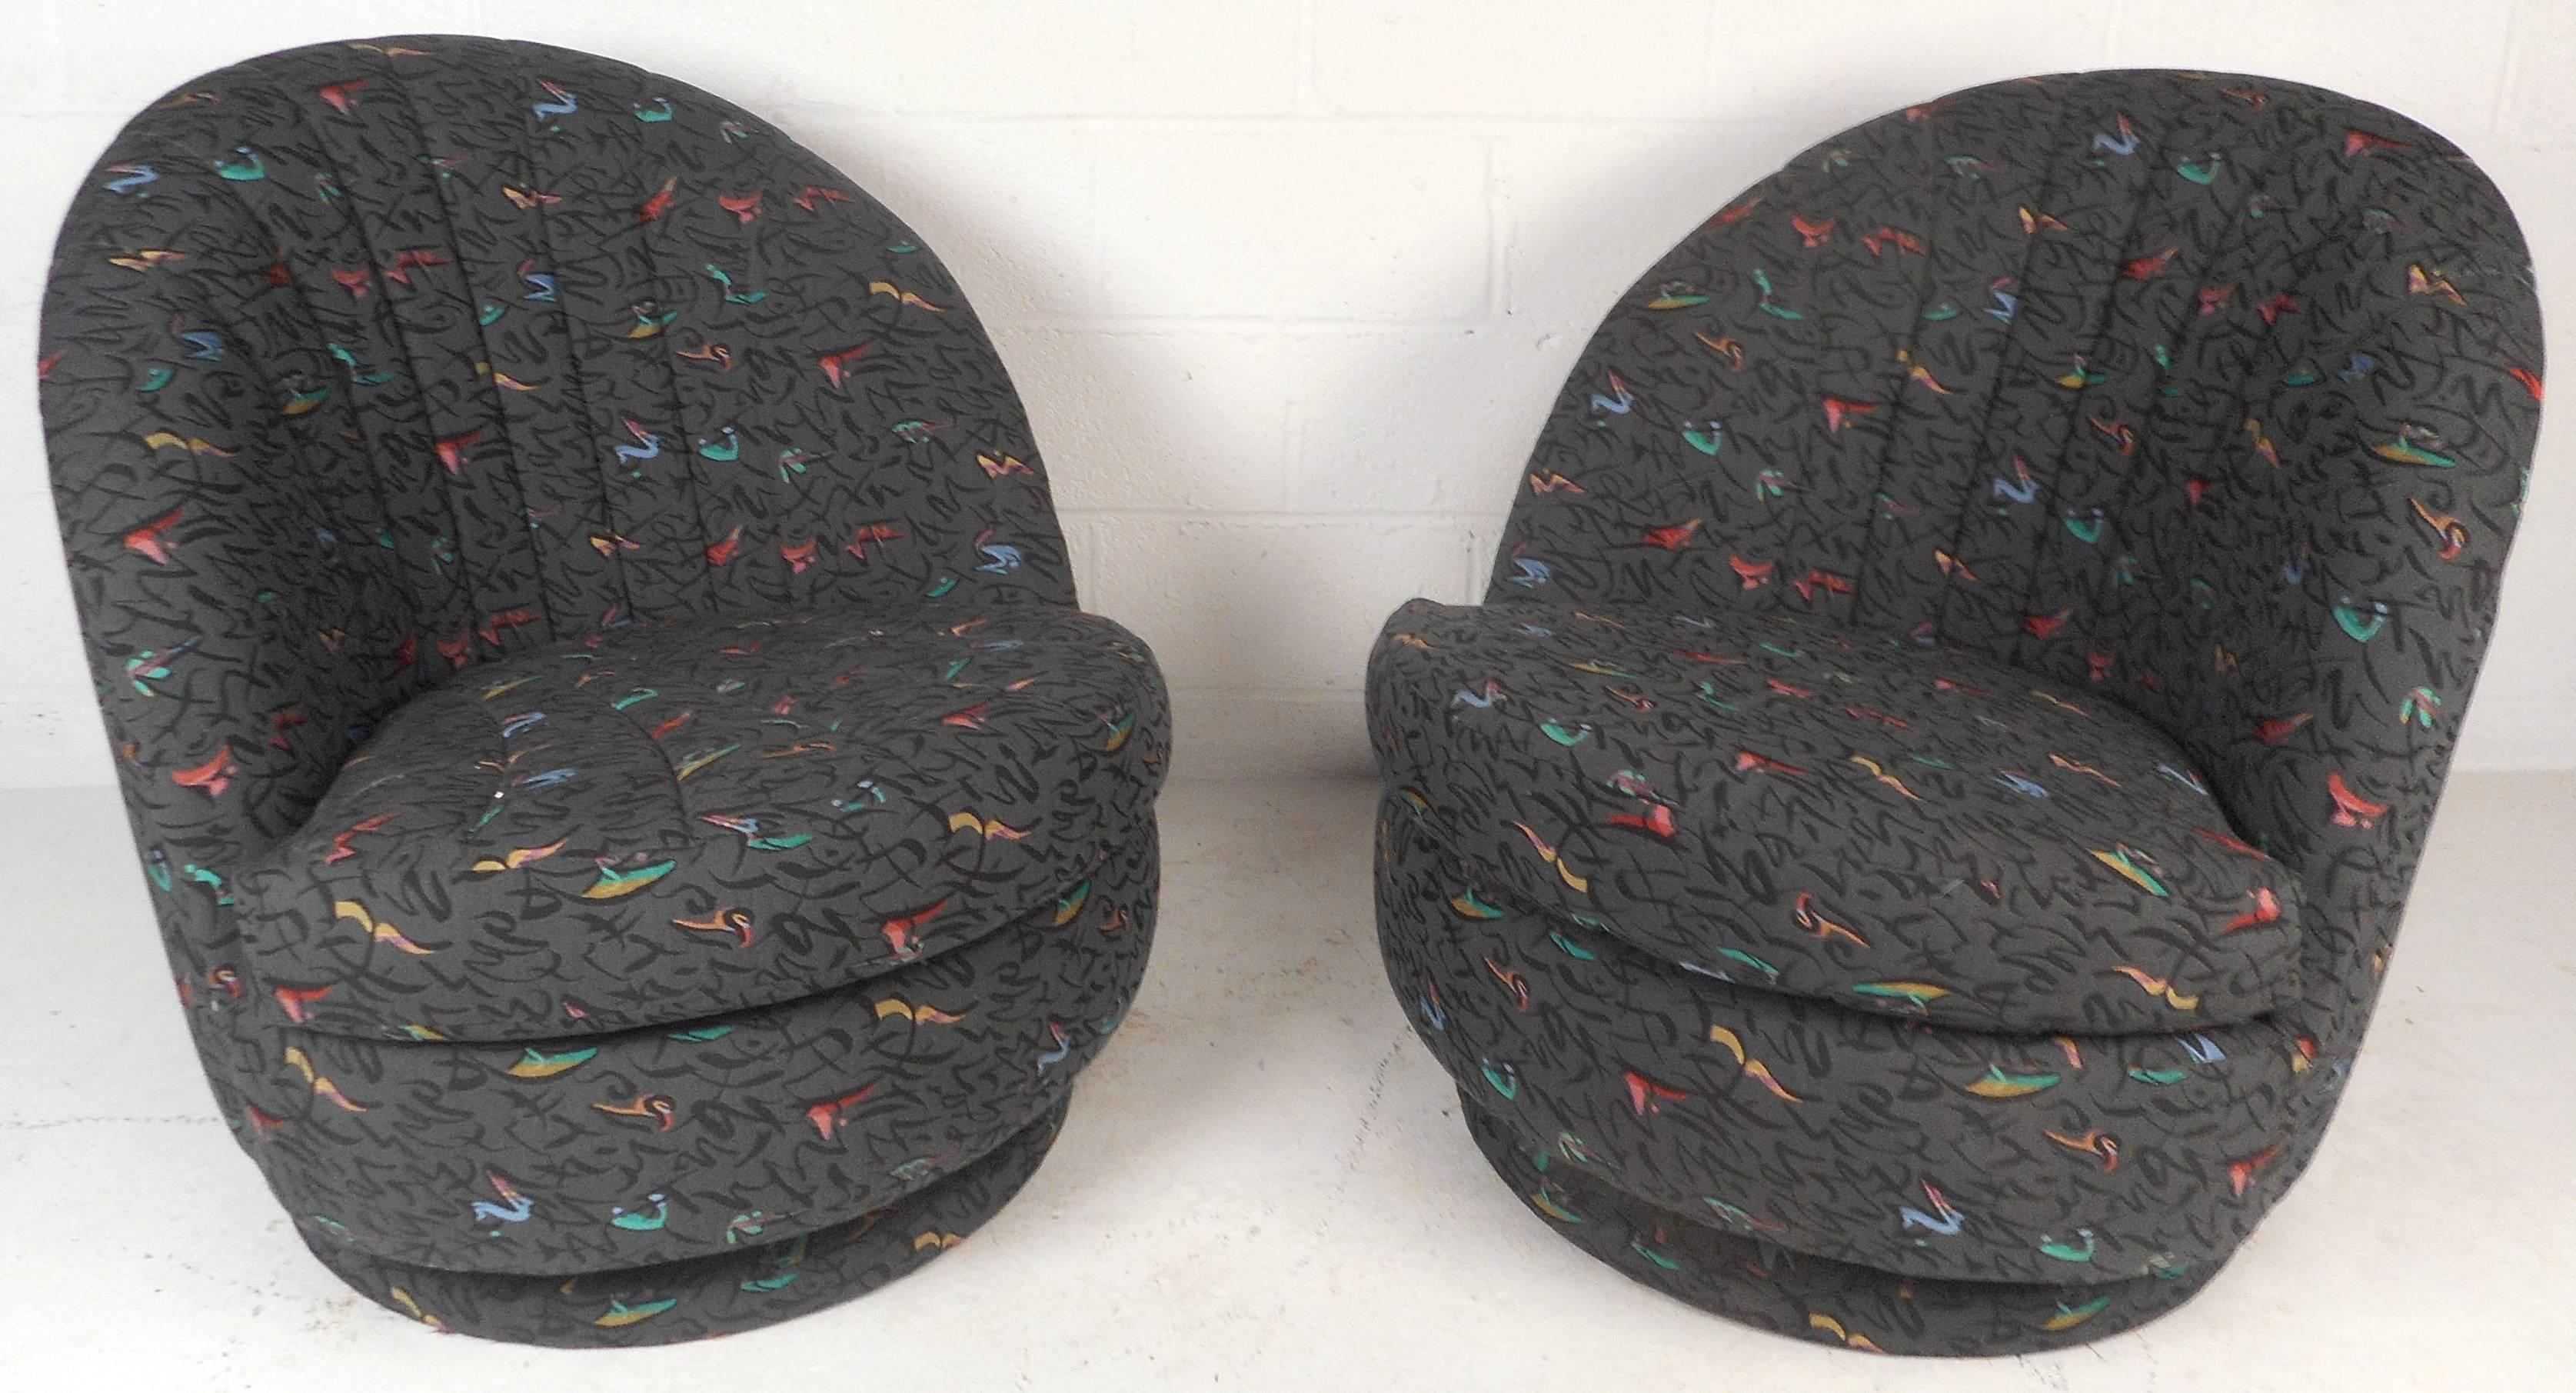 This beautiful pair of vintage modern lounge chairs feature unique shell shaped back rests thick padded cushions. The comfortable design offers the ability to swivel with ease. Elegant multicolored plush upholstery covers the entire chair making